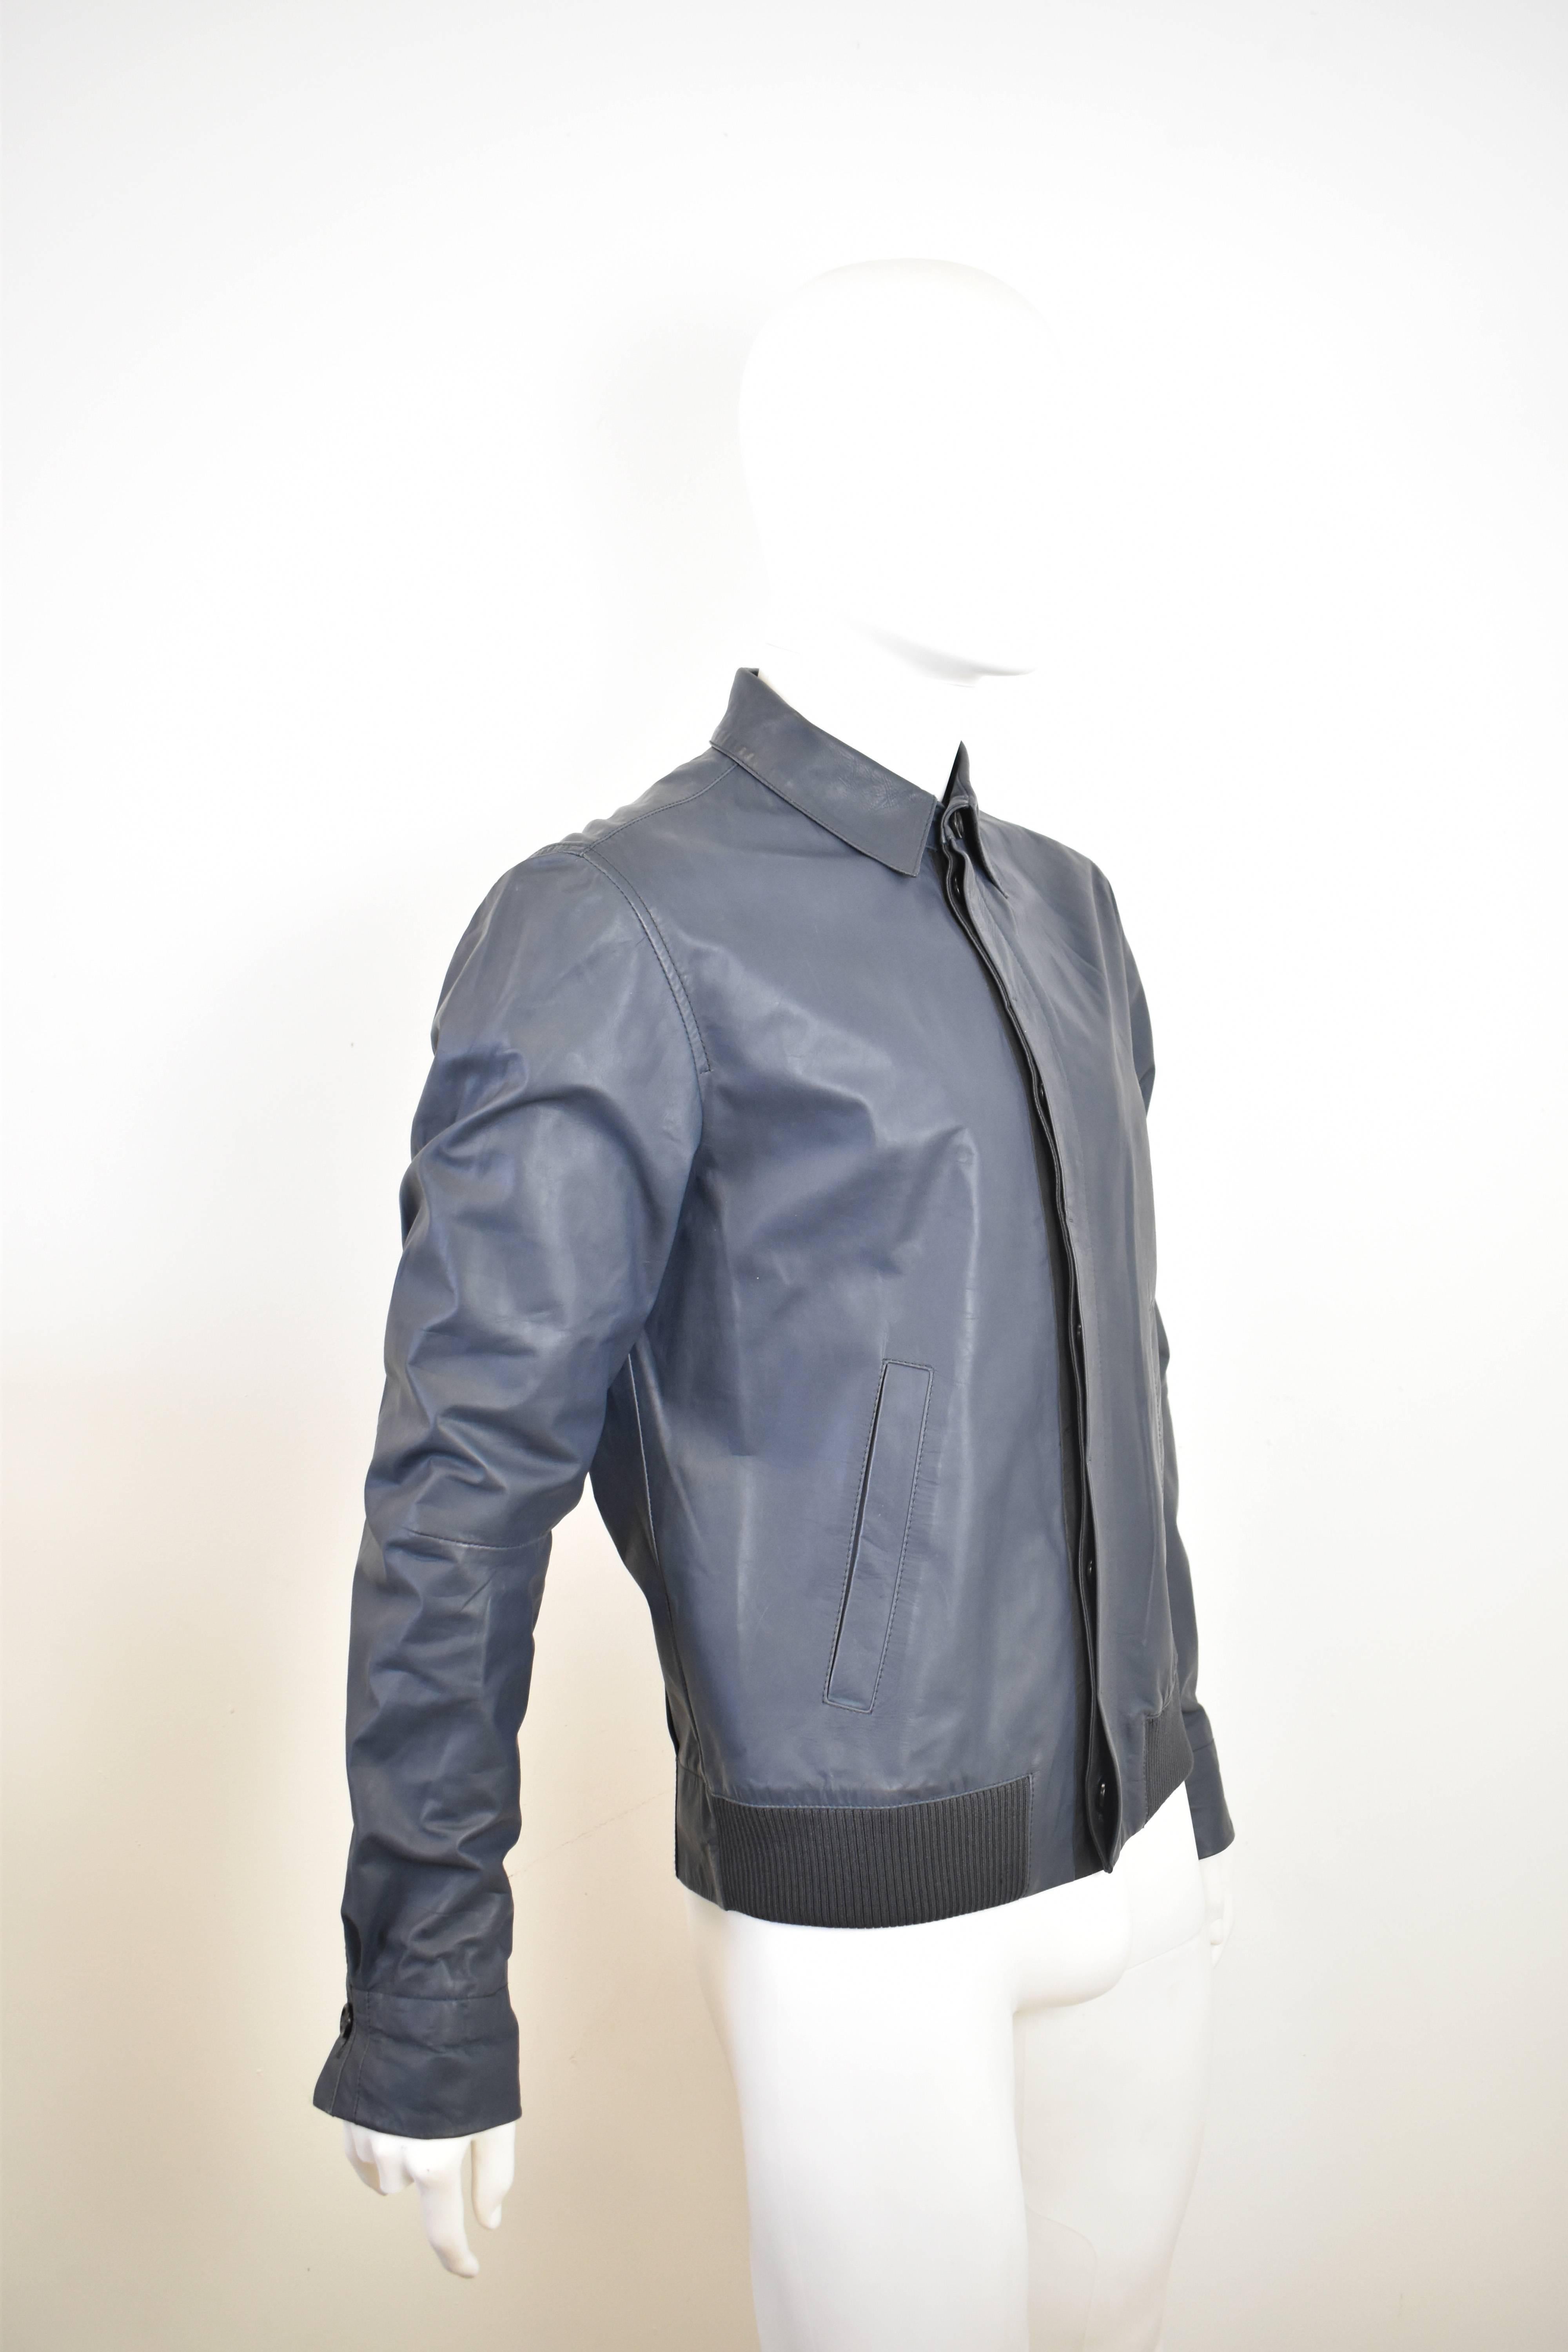 A blue men’s zip-up leather blouson jacket from Alexander McQueen. The jacket has a slim fit, with a shirt-like design that has been mixed with a bomber jacket creating a perfect transitional season light jacket/blouson. It is made from 100% leather